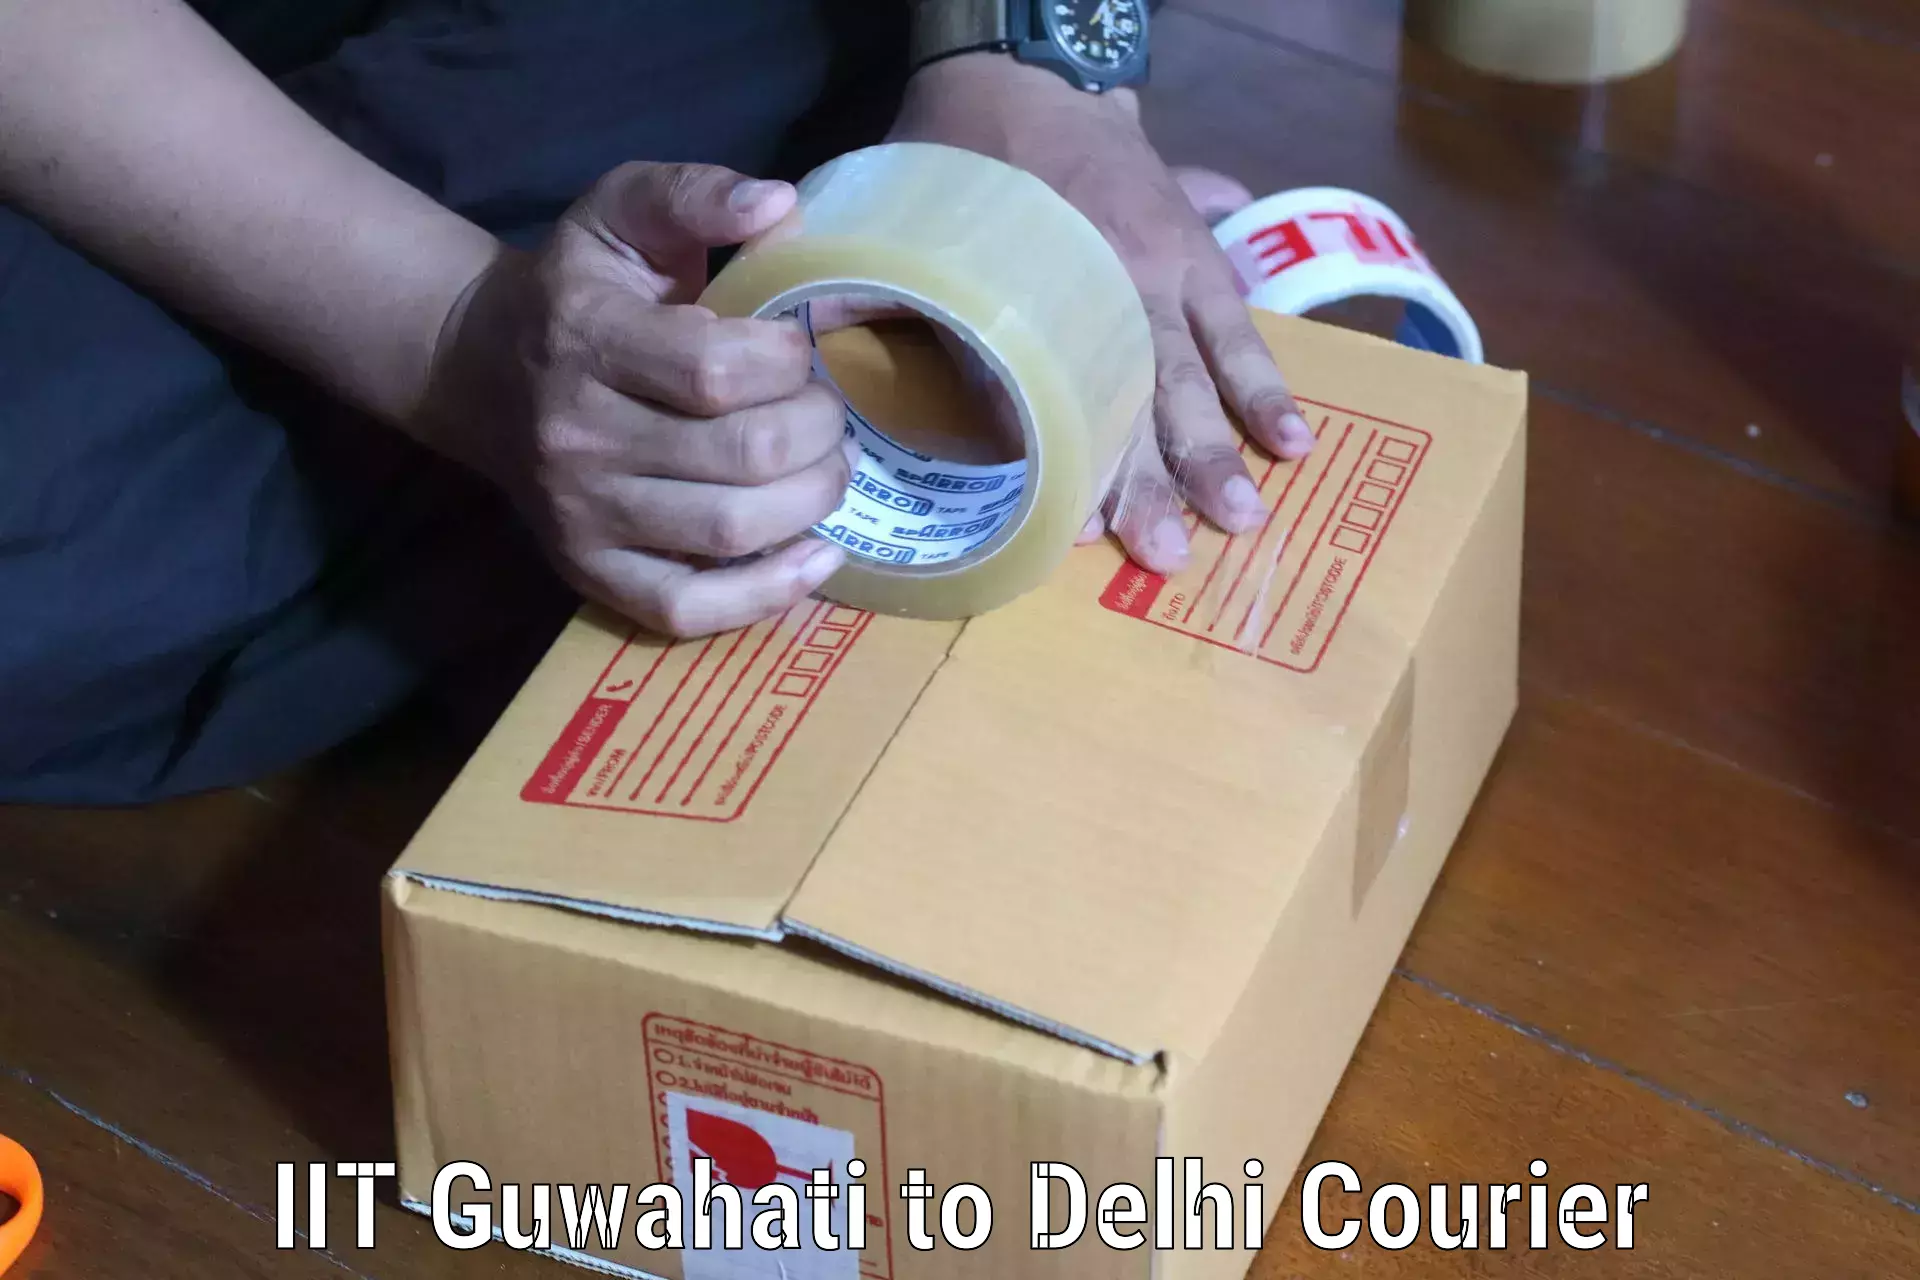 Cargo delivery service IIT Guwahati to East Delhi